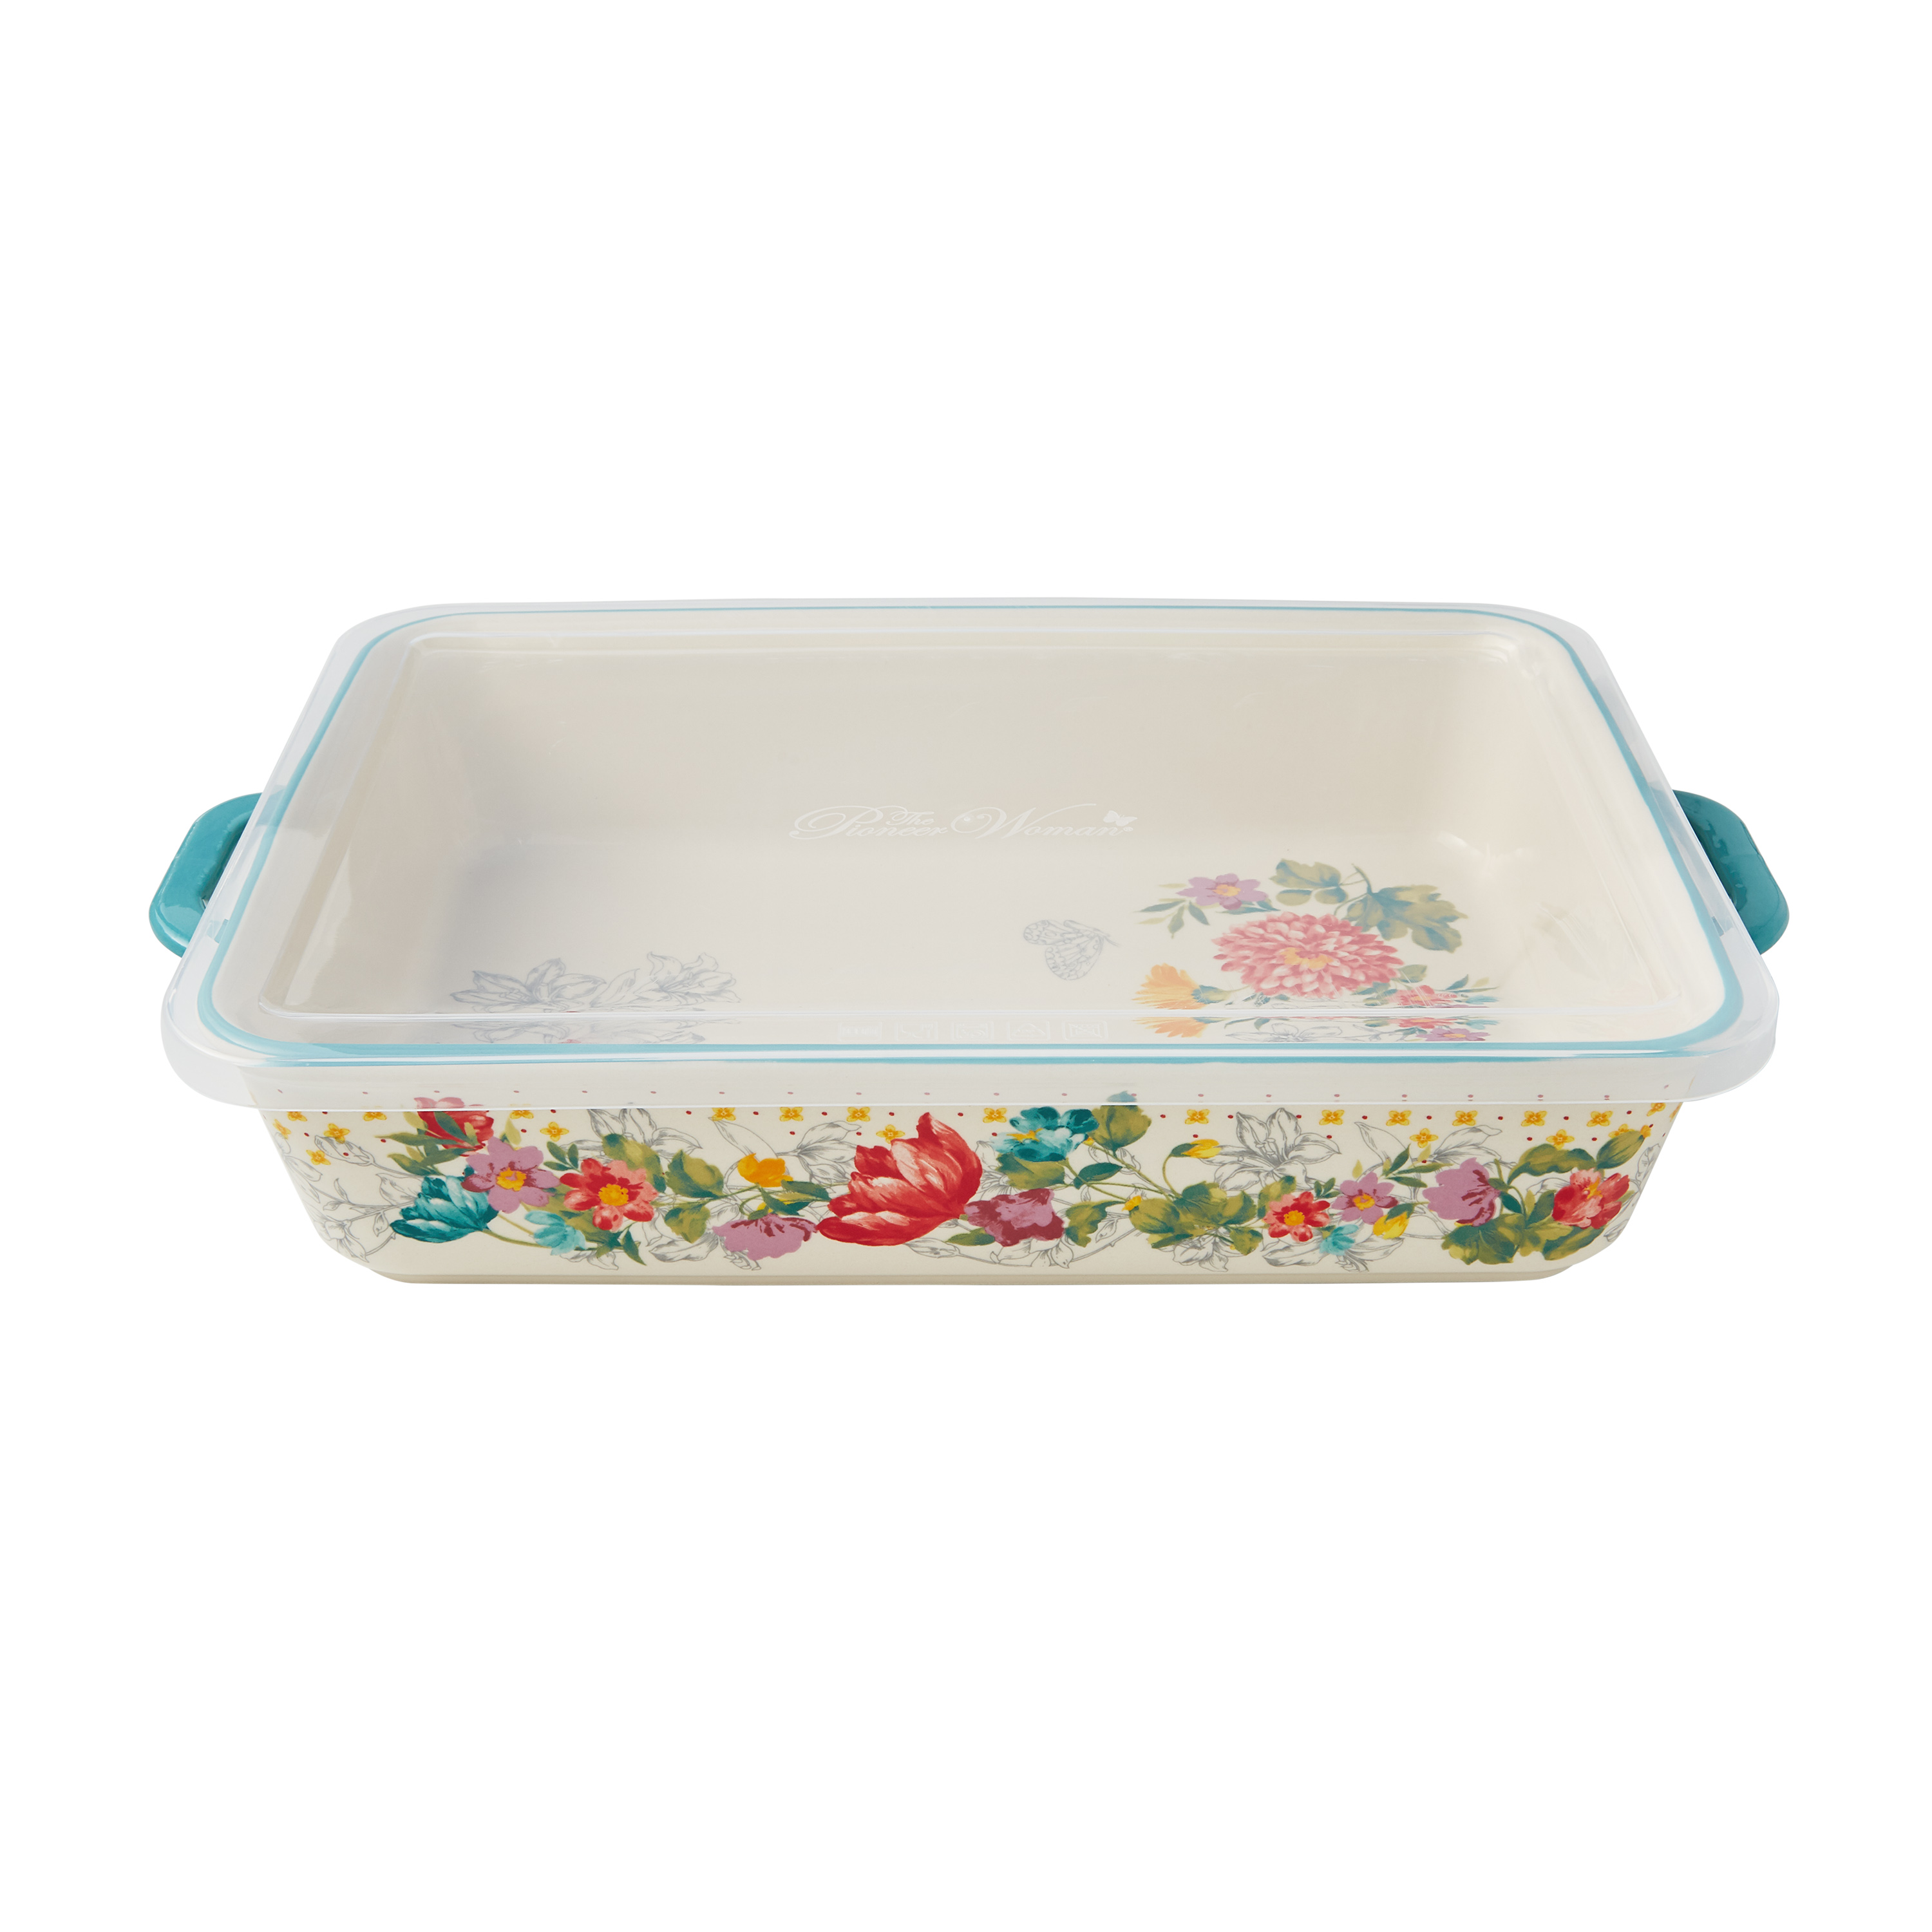 The Pioneer Woman Blooming Bouquet 20-Piece Bake & Prep Set with Baking Dish & Measuring Cups - image 7 of 8